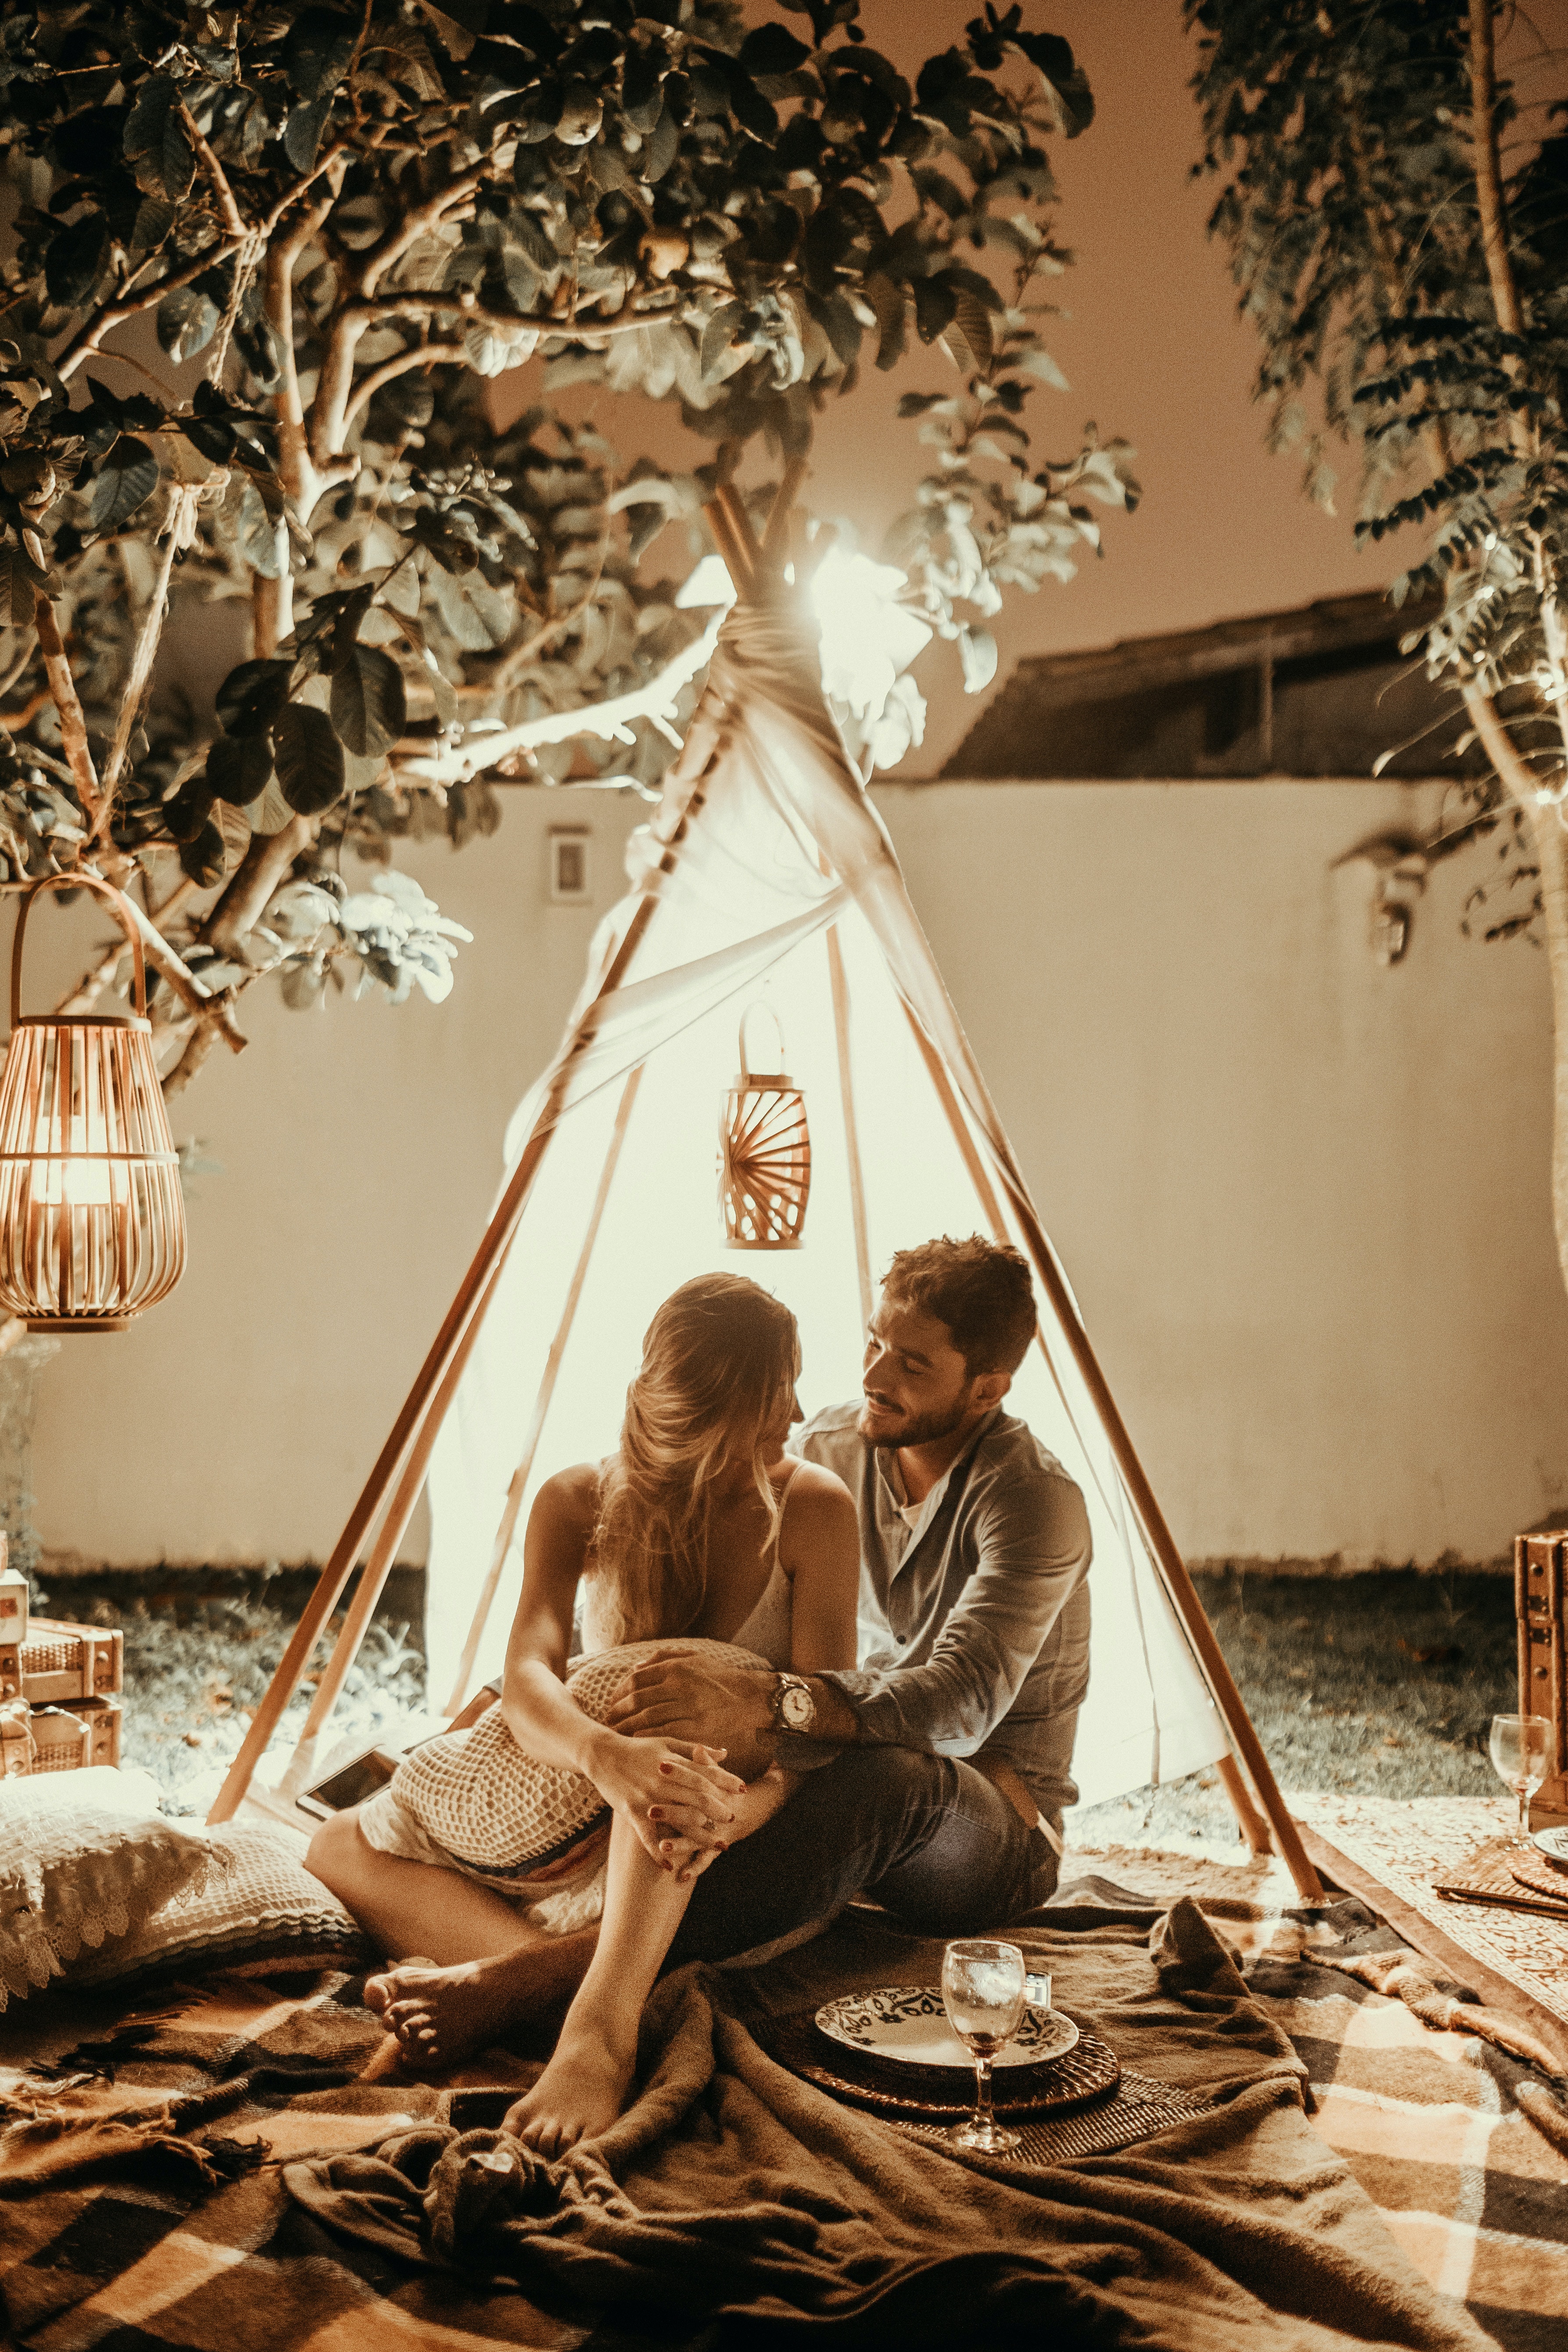 A couple enjoying a romantic night together. | Source: Pexels